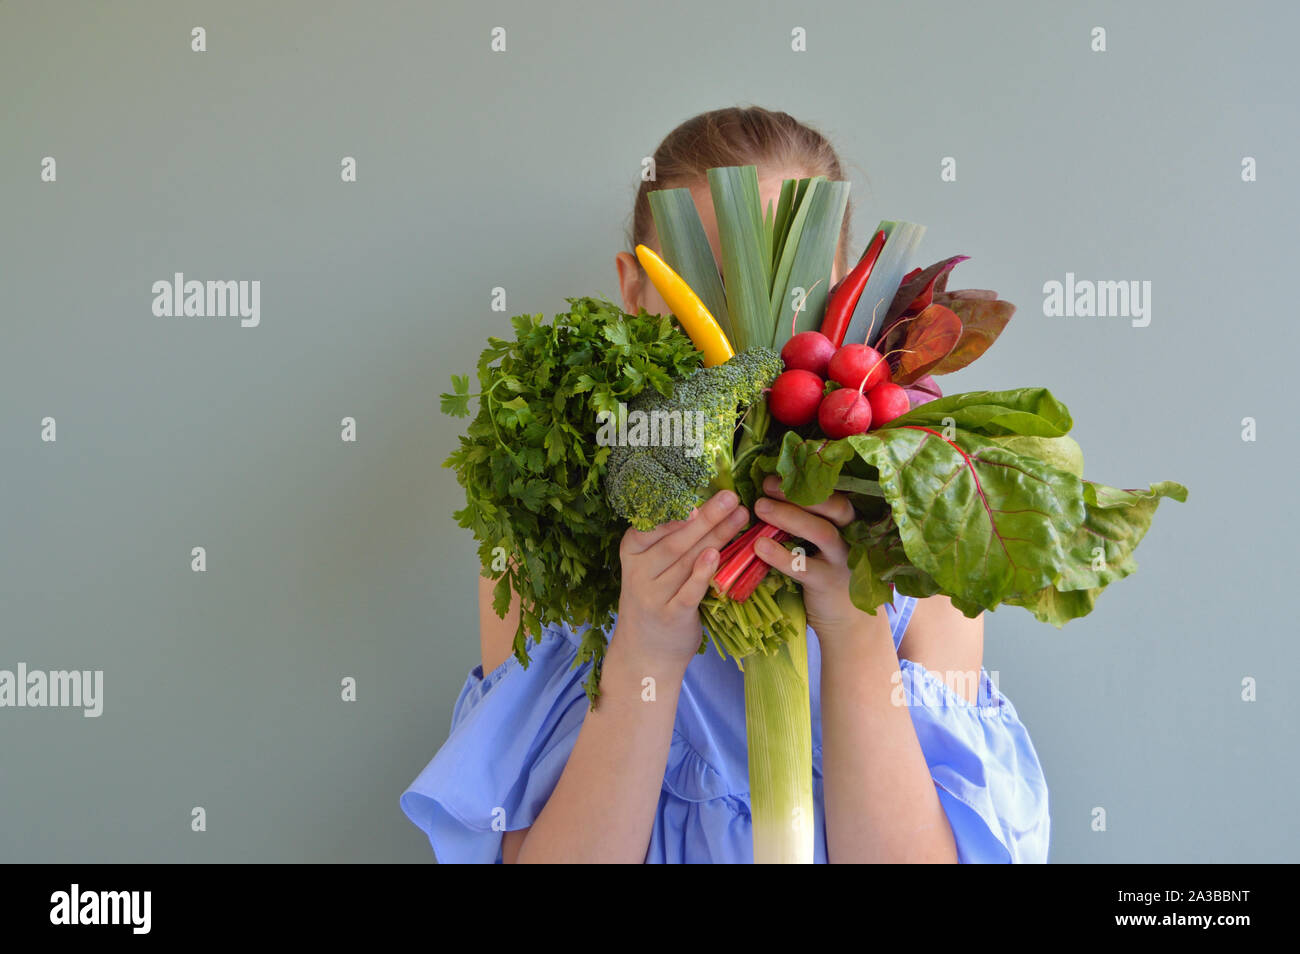 Girl holding vegetables bouquet in front of face Stock Photo